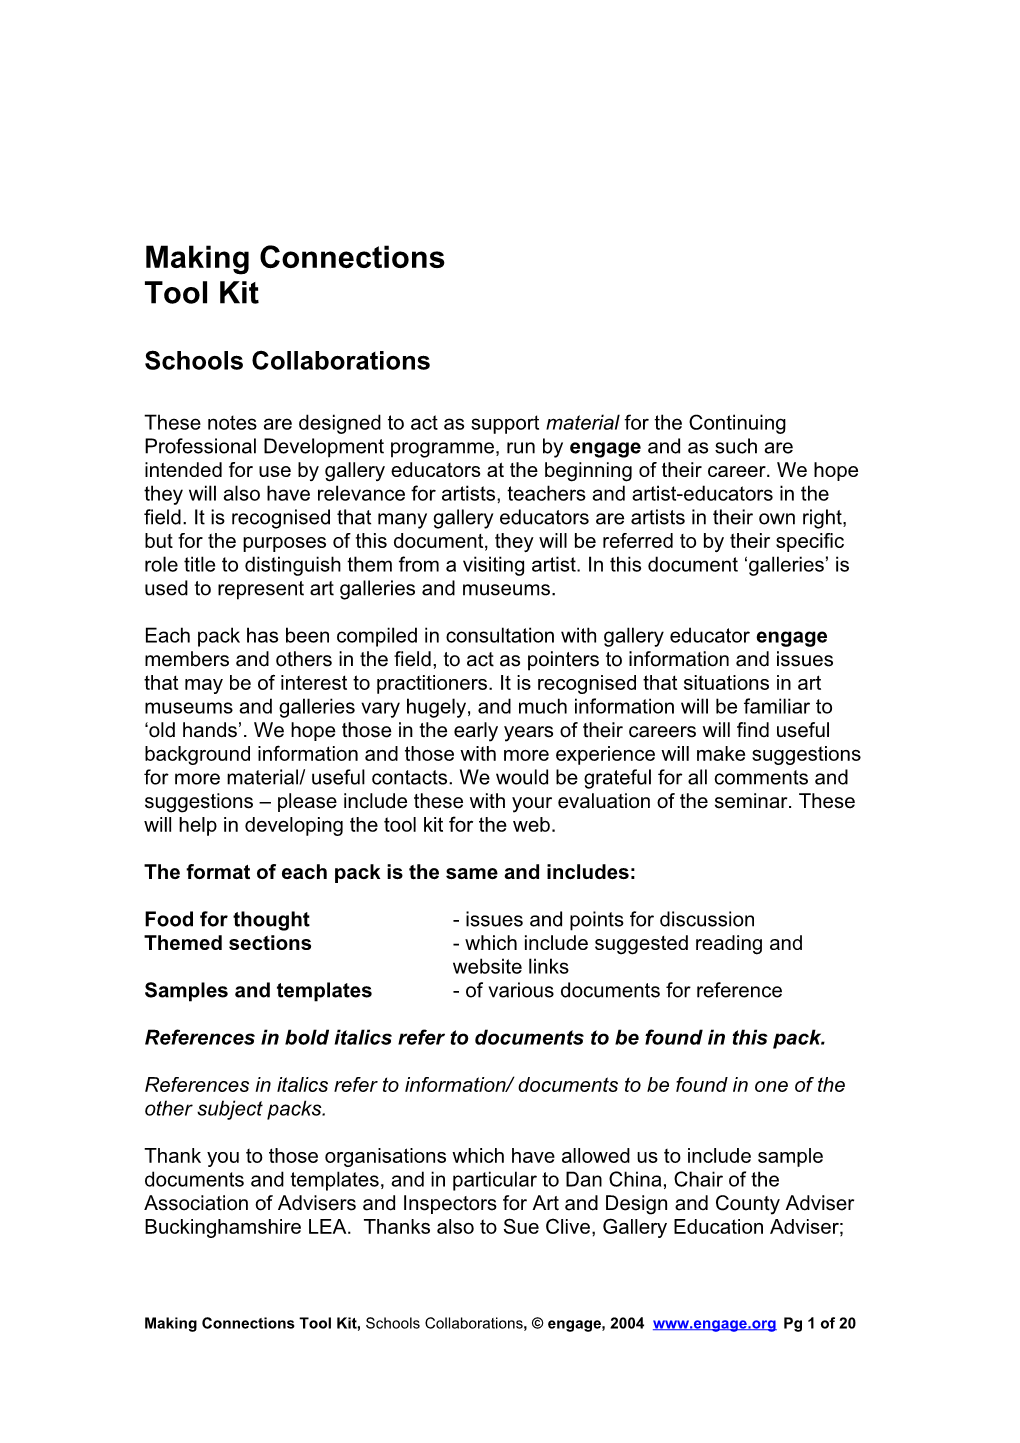 Making Connections - Tool Kit s1